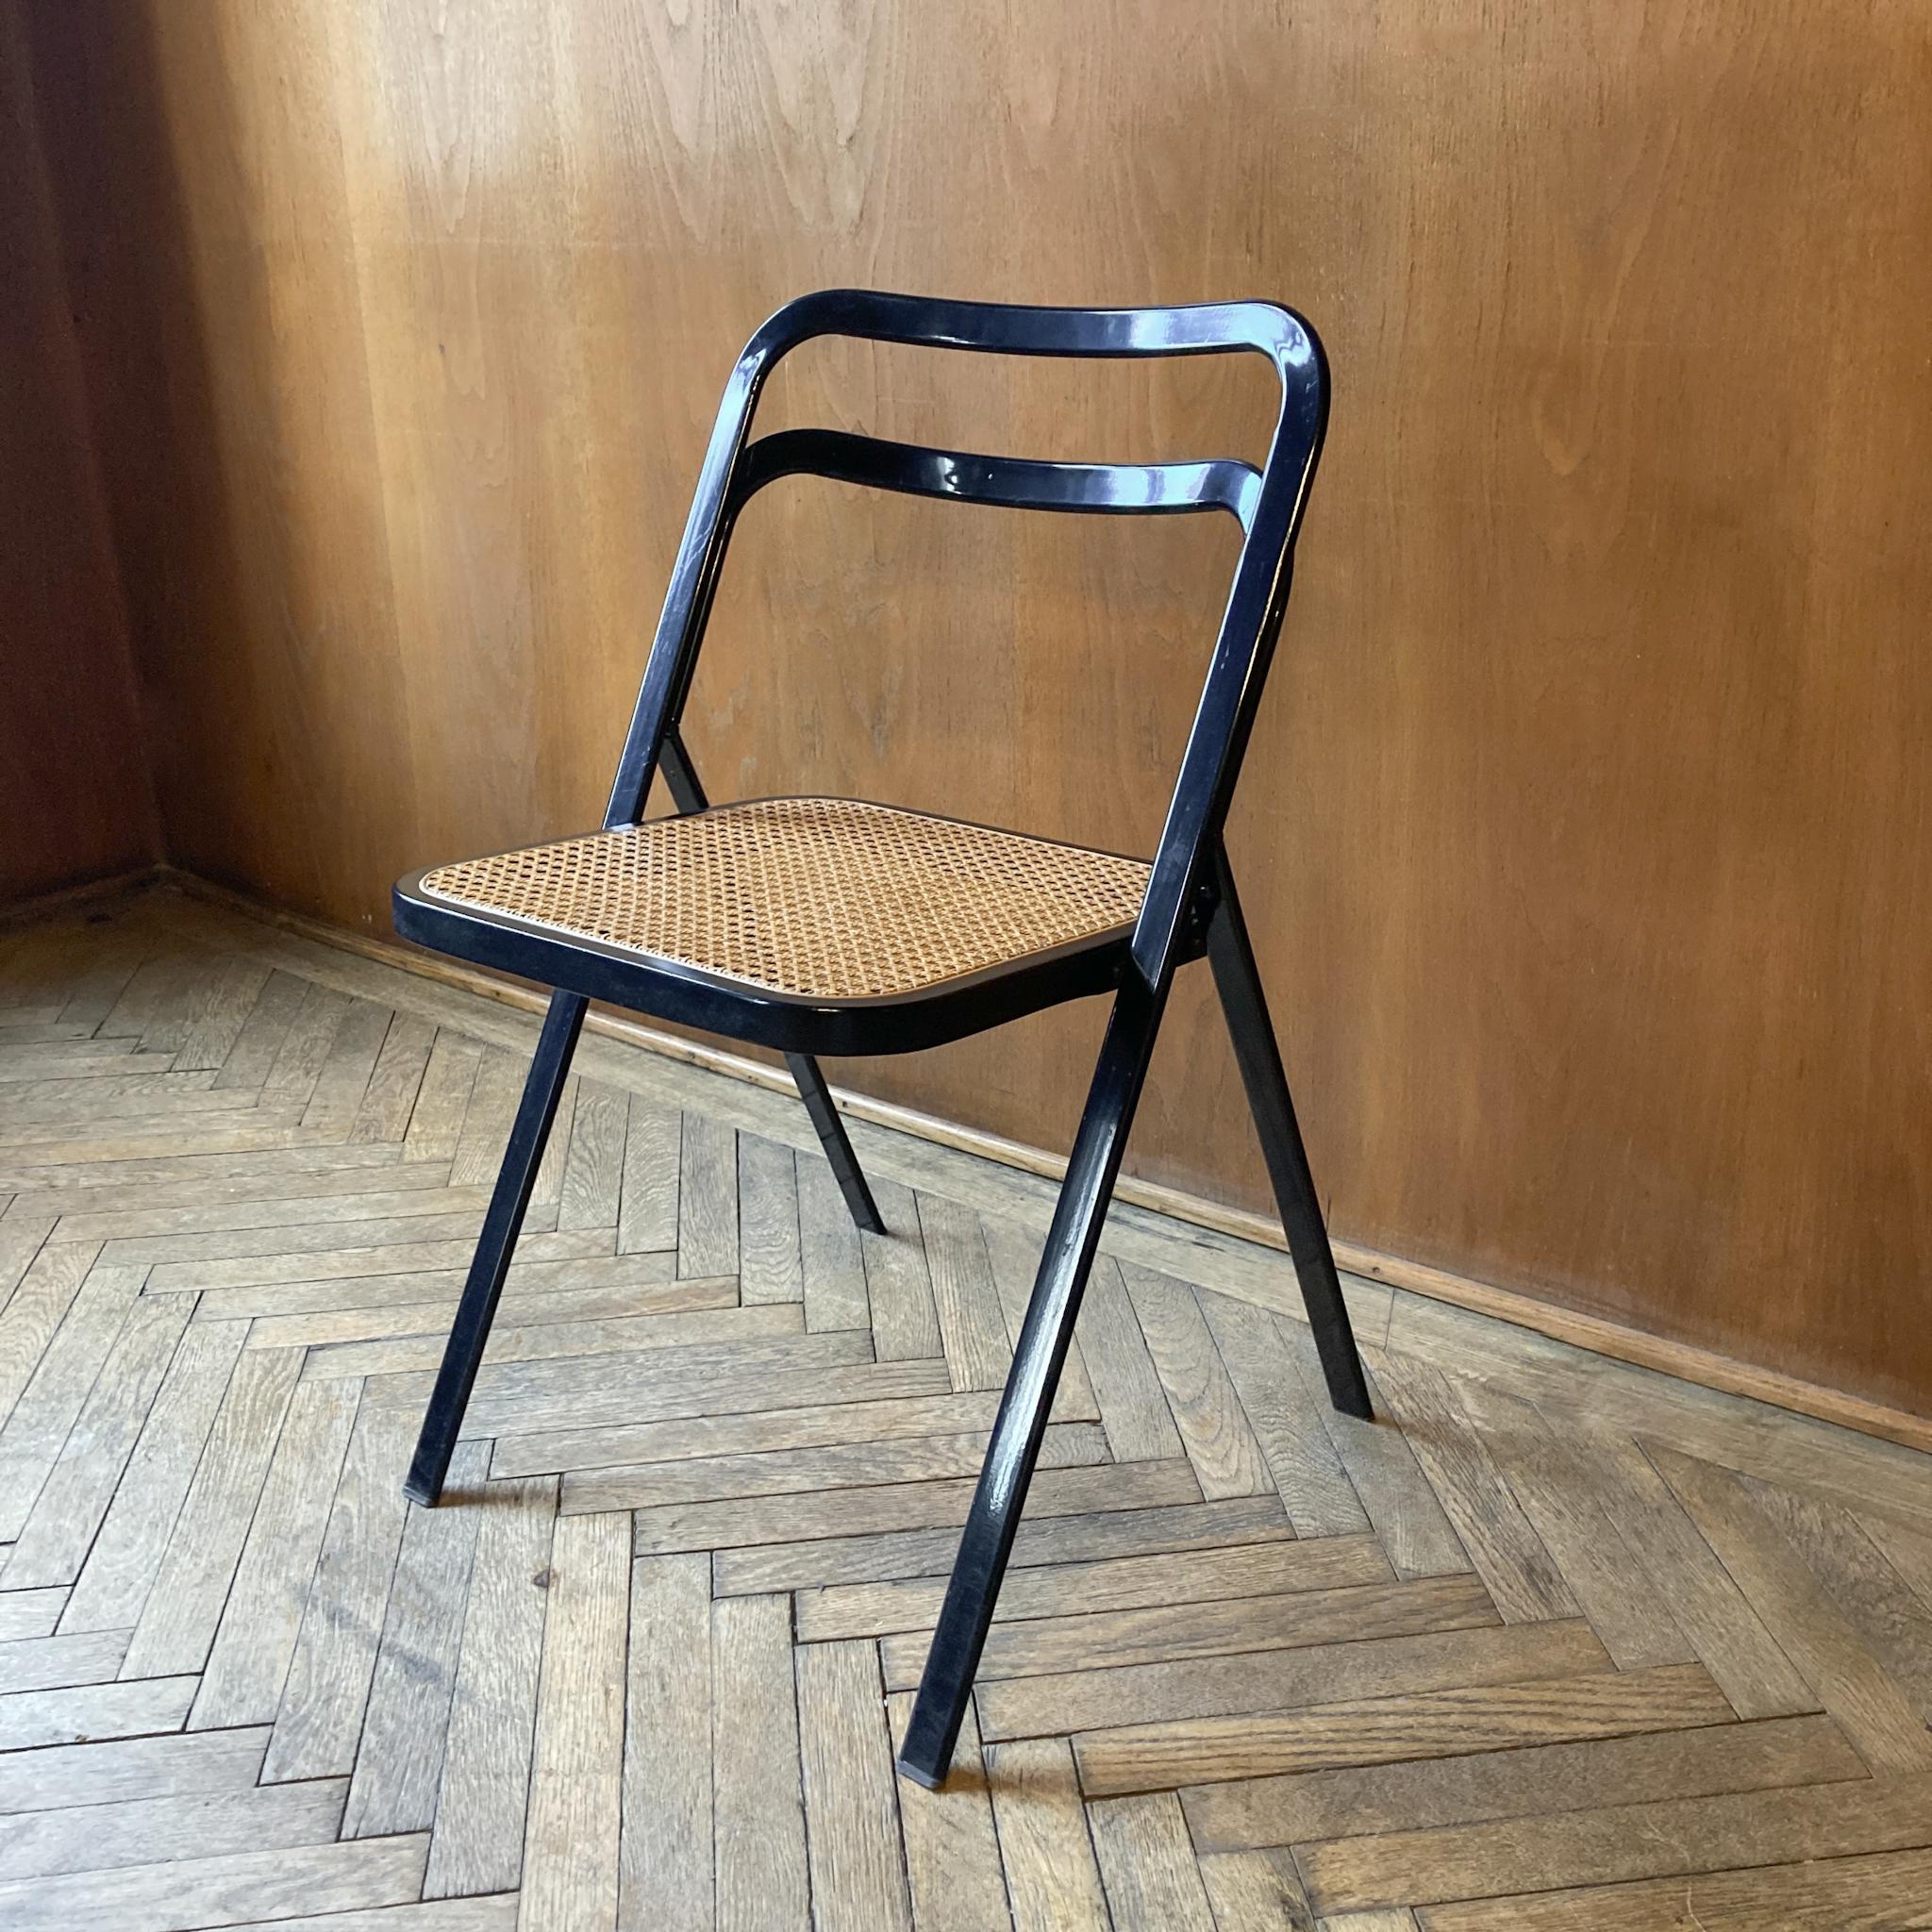 Italian Mid-Century Modern Folding Chairs Viennese Straw by G. Cattelan, Italy 1970s For Sale